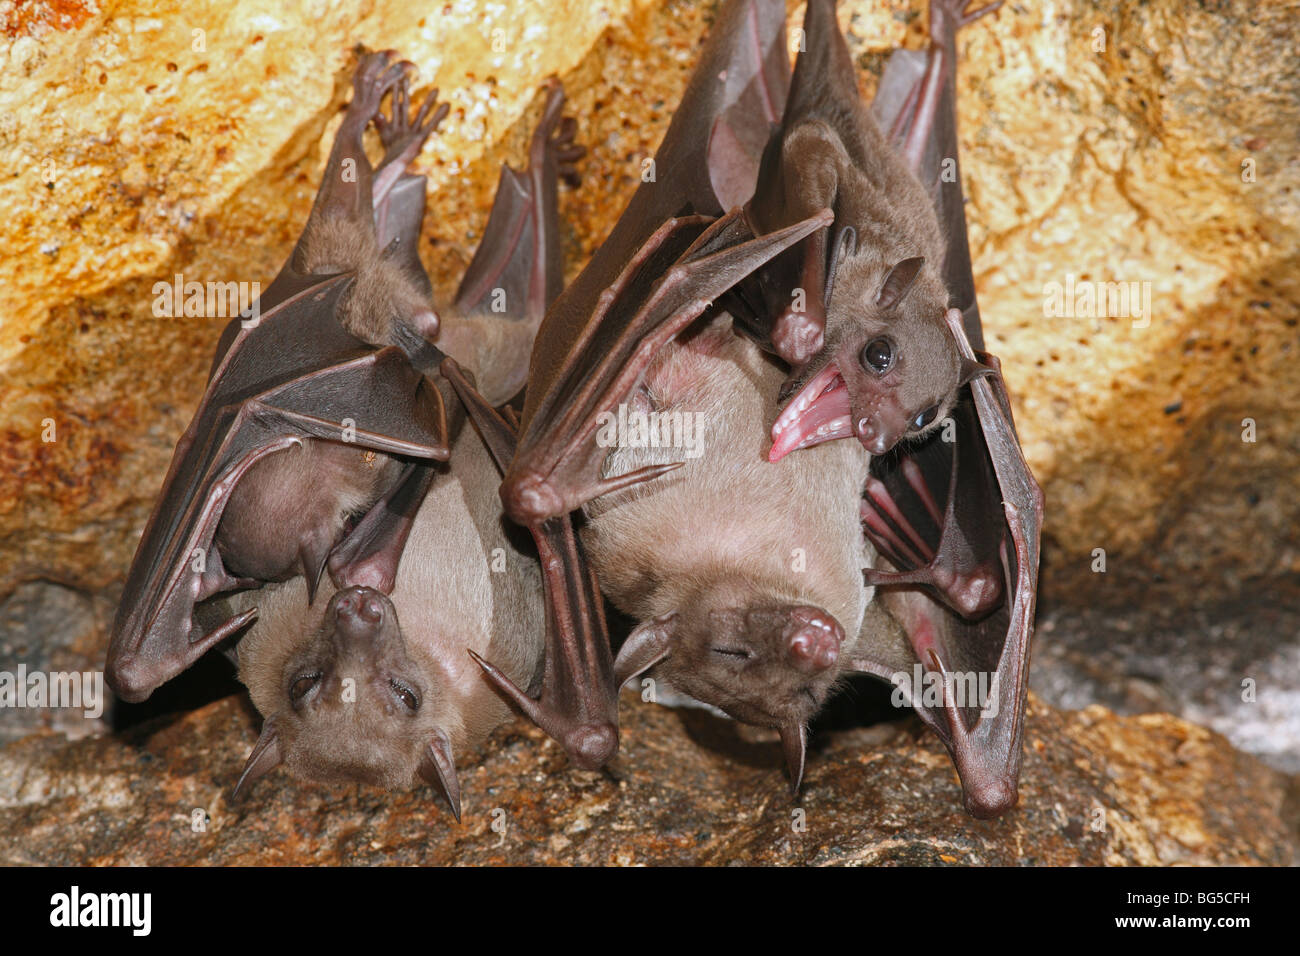 Geoffroy's Rousette, or Common Rousette Bats, Rousettus amplexicaudatus, roosting in the cave at Pura Goa Lawah, or Bat Cave Temple in Bali, Indonesia Stock Photo